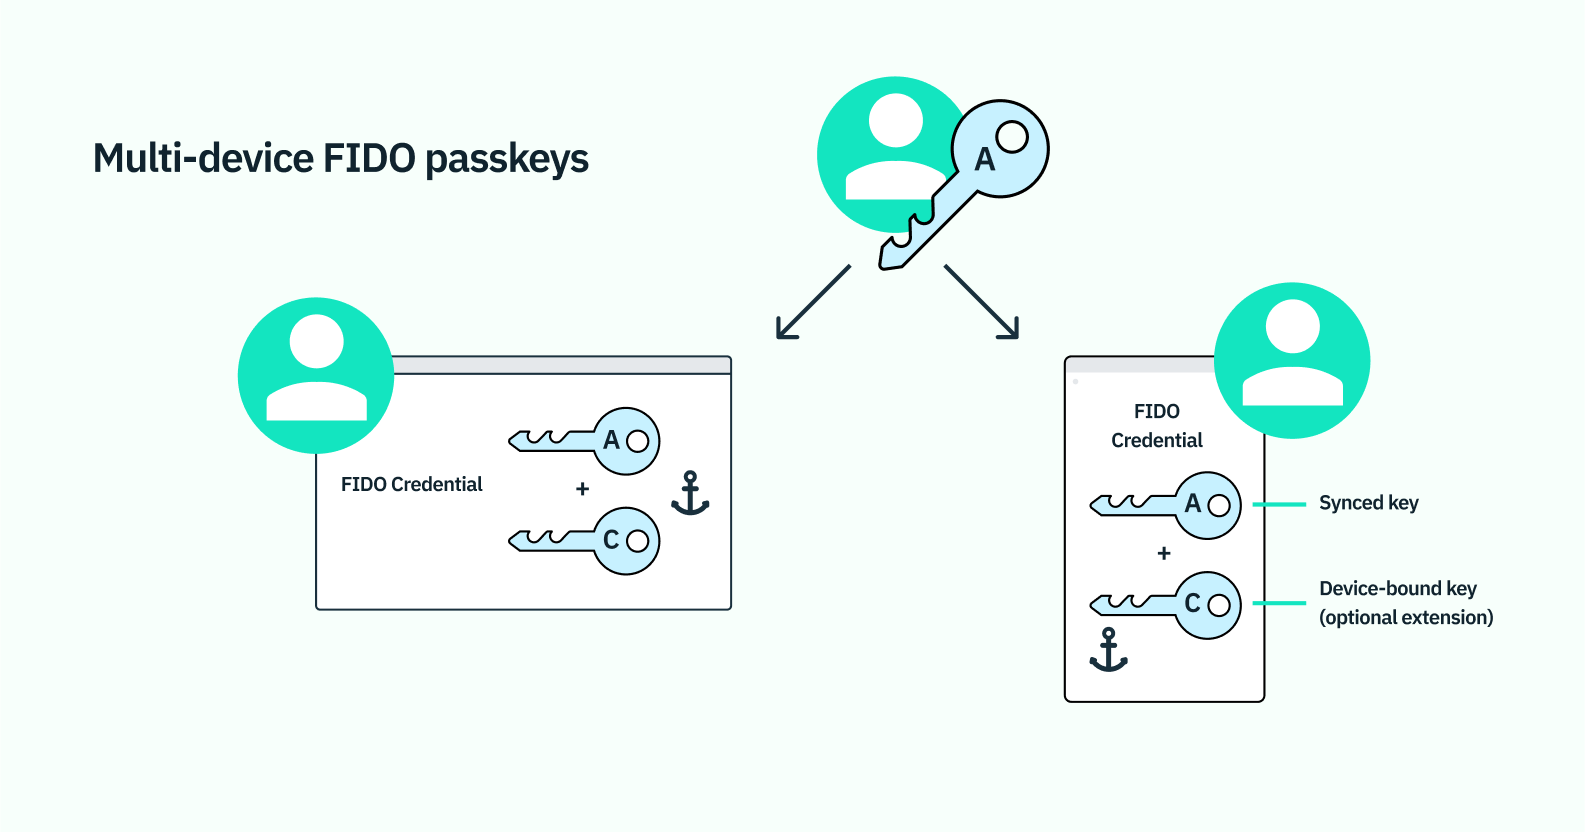 A diagram showing how multi-device FIDO passkeys work